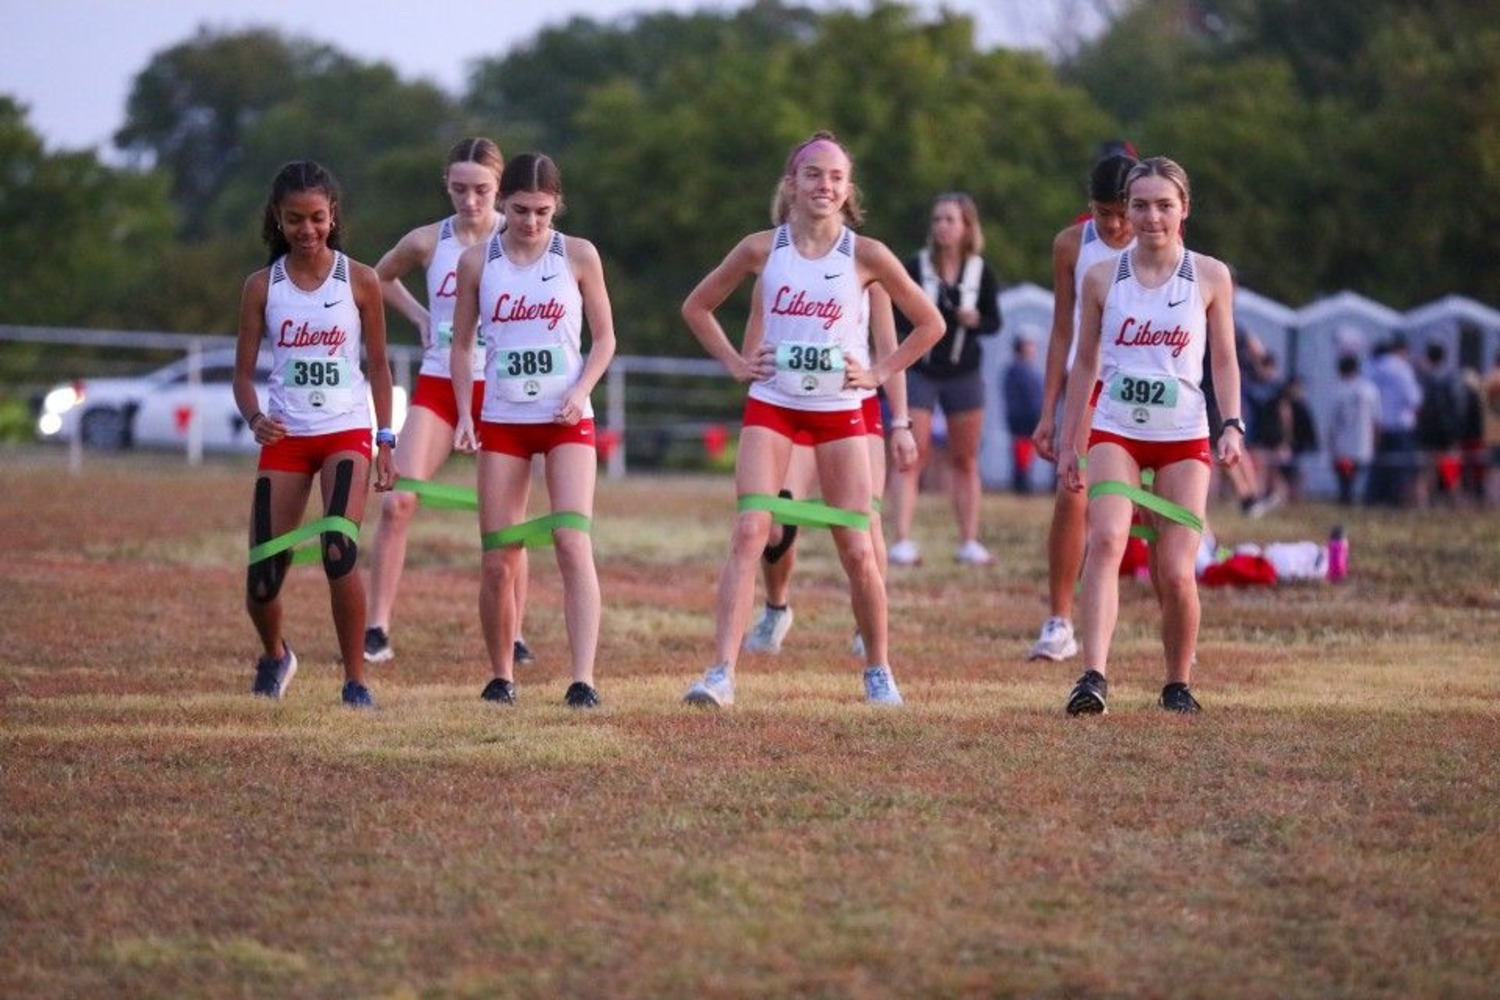 With only two invitationals left until Districts, the cross country team will head to Southlake for the Southlake Invitational. The team will hope to continue to improve before Districts.